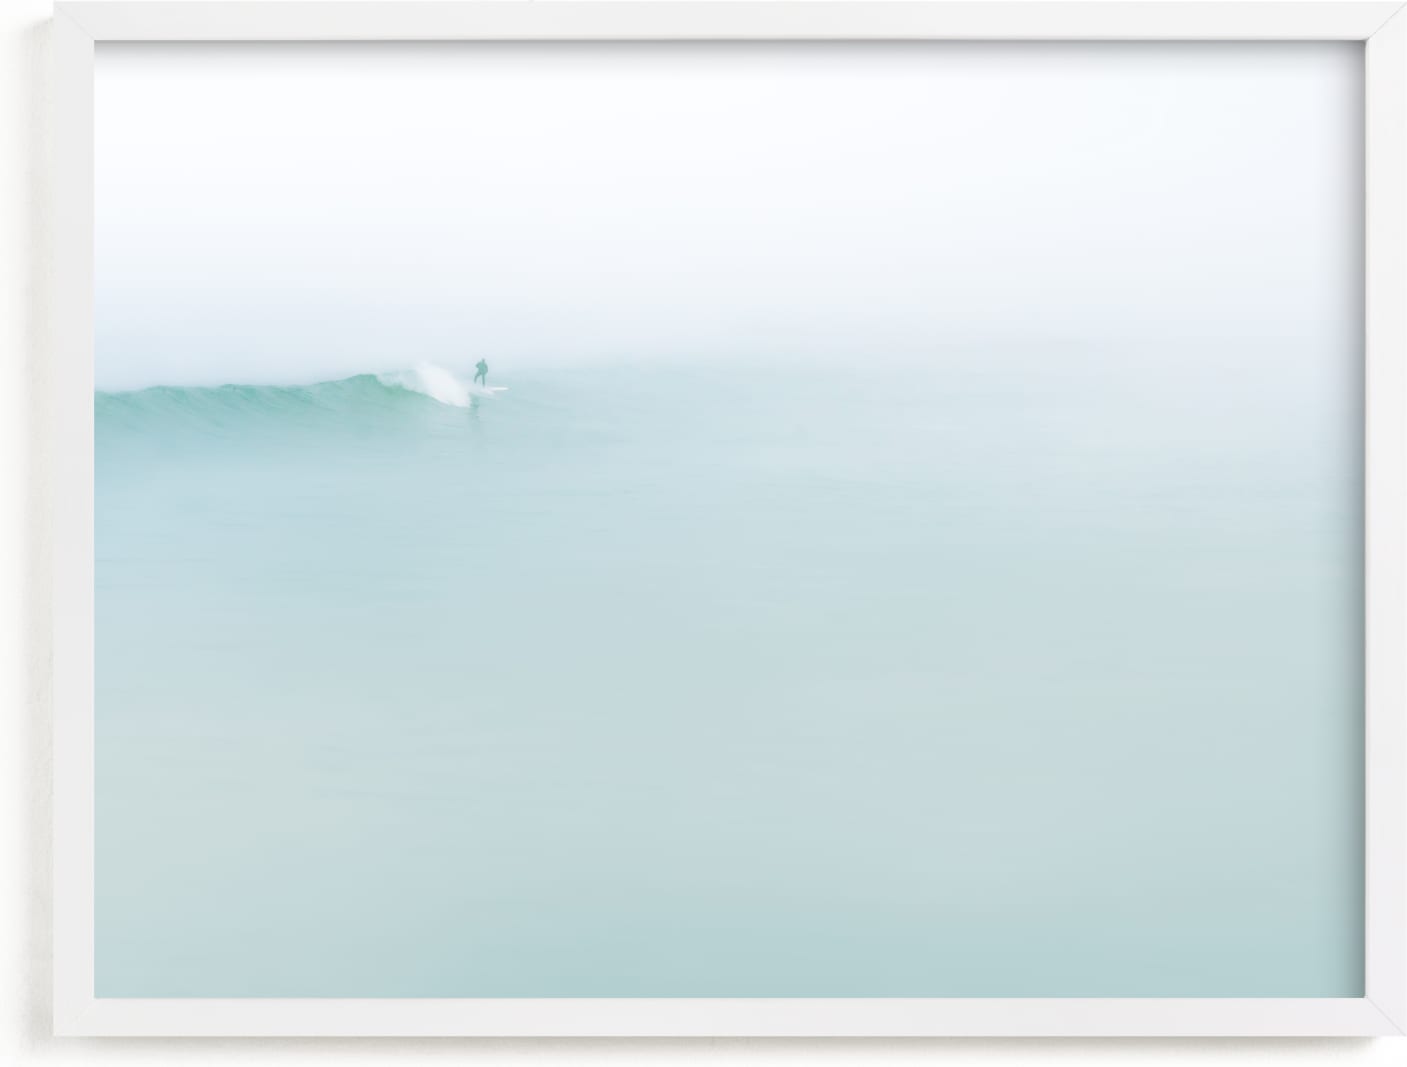 This is a blue art by Mike Sunu called Morning Surf.